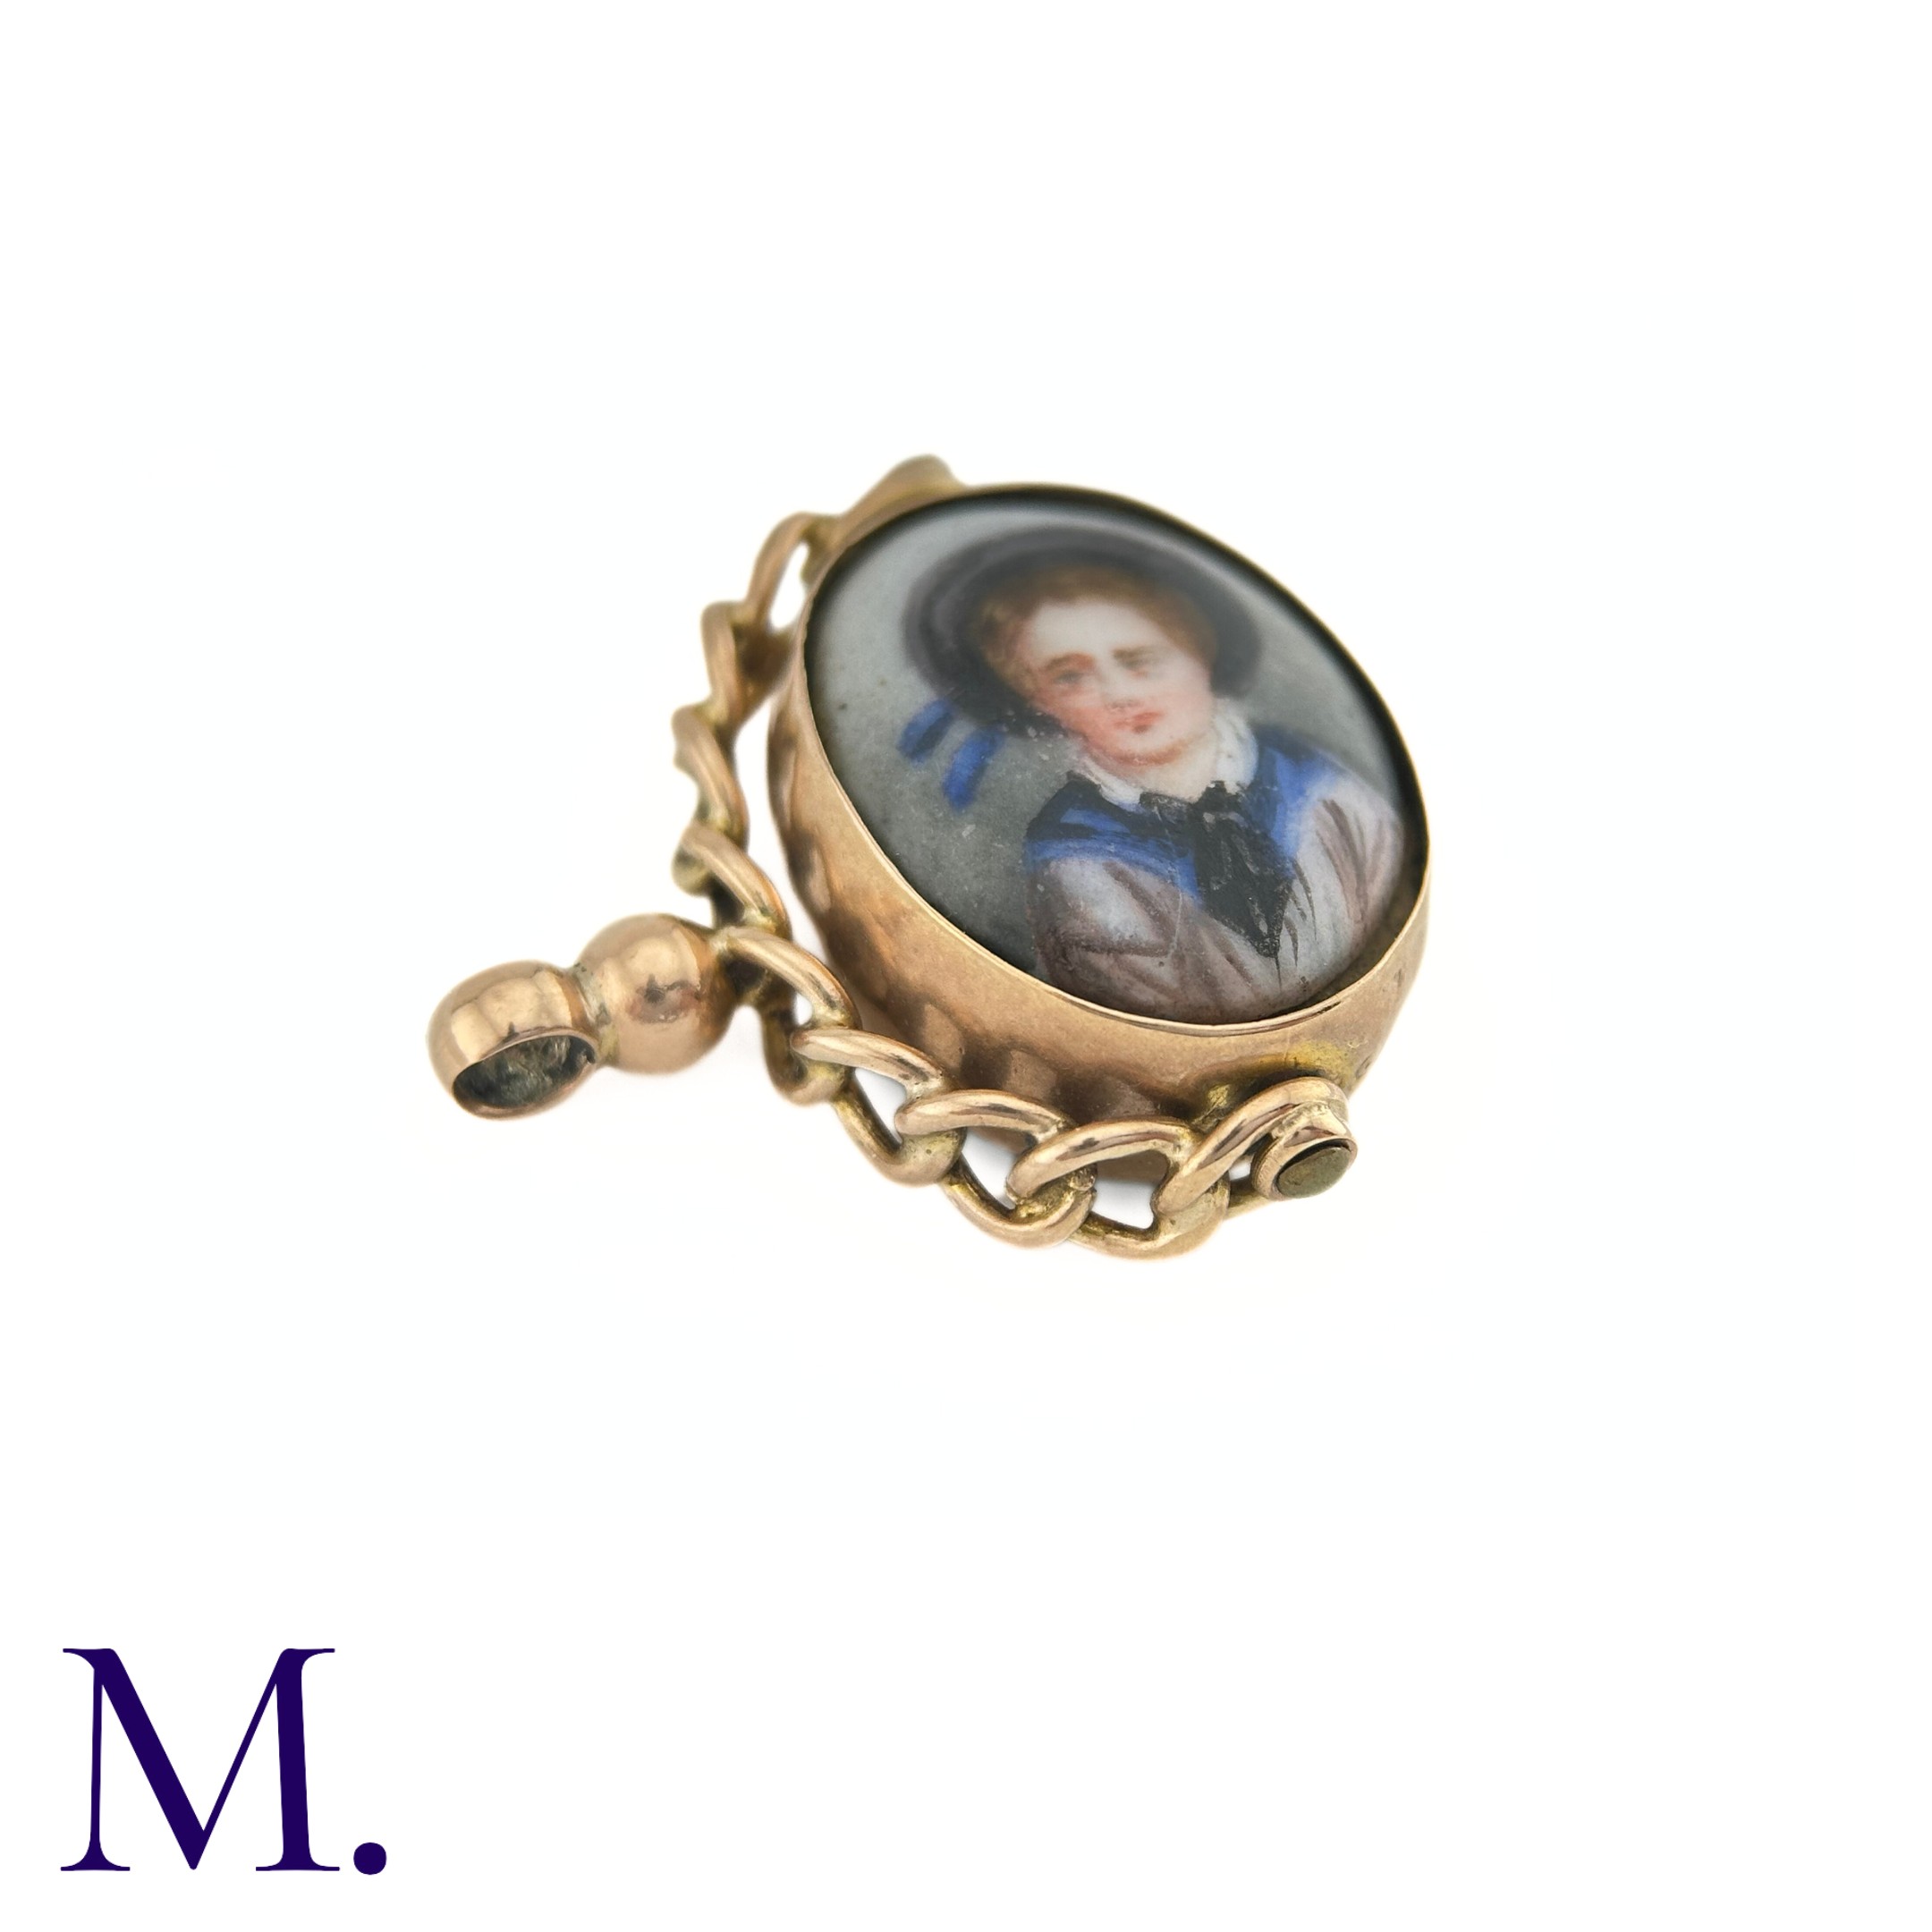 An Antique Miniature and Bloodstone Spinning Fob The 9ct rose gold spinning fob is set with an - Image 2 of 6